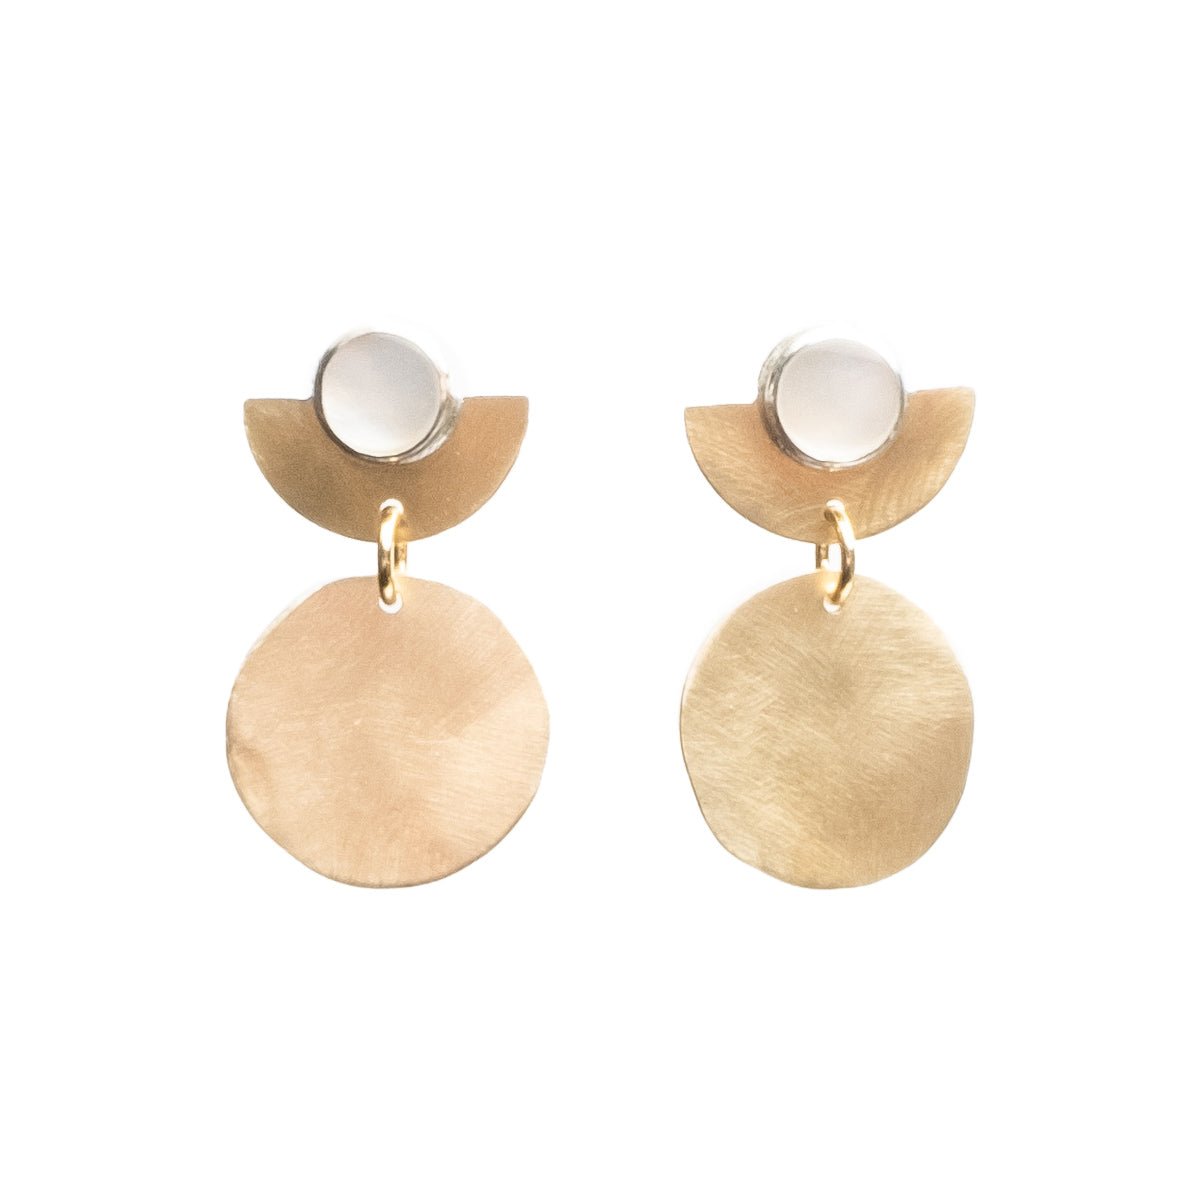 Pair of brass earrings from designer Kari Phillips. The earrings have a circular pearl focal point. Designed and made in Portland Oregon.